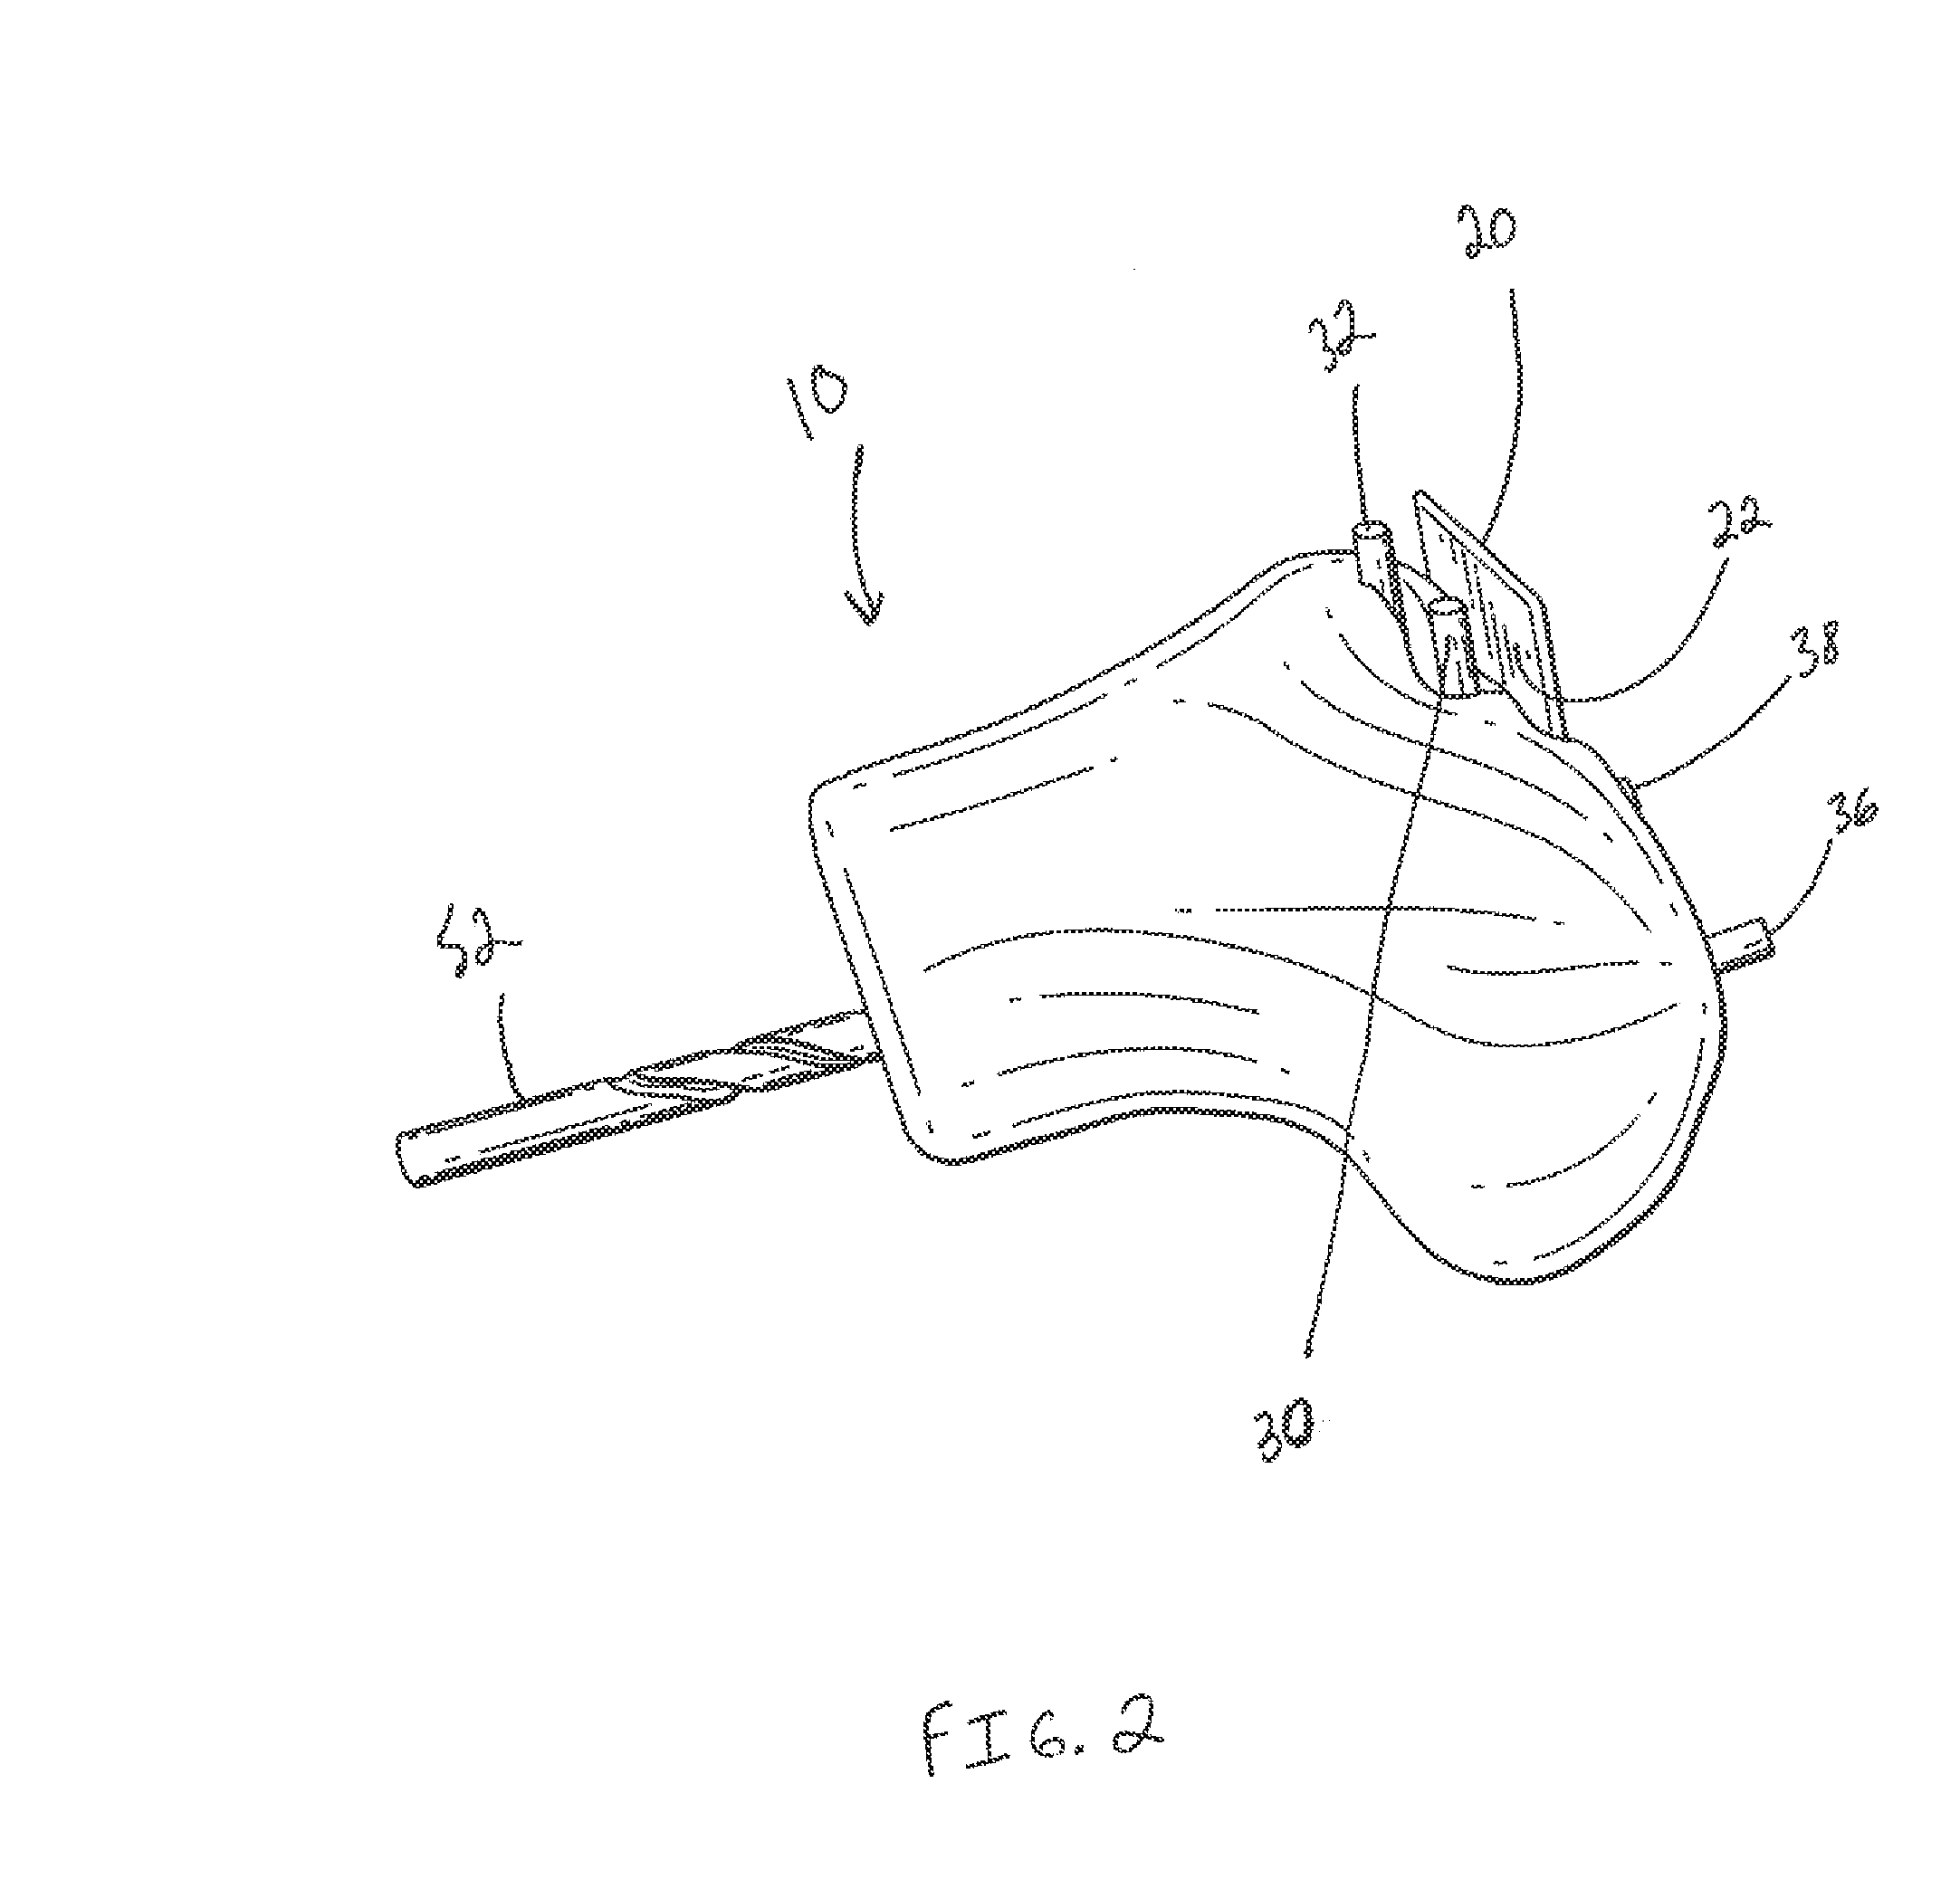 Methods for manufacturing custom cutting guides in orthopedic applications